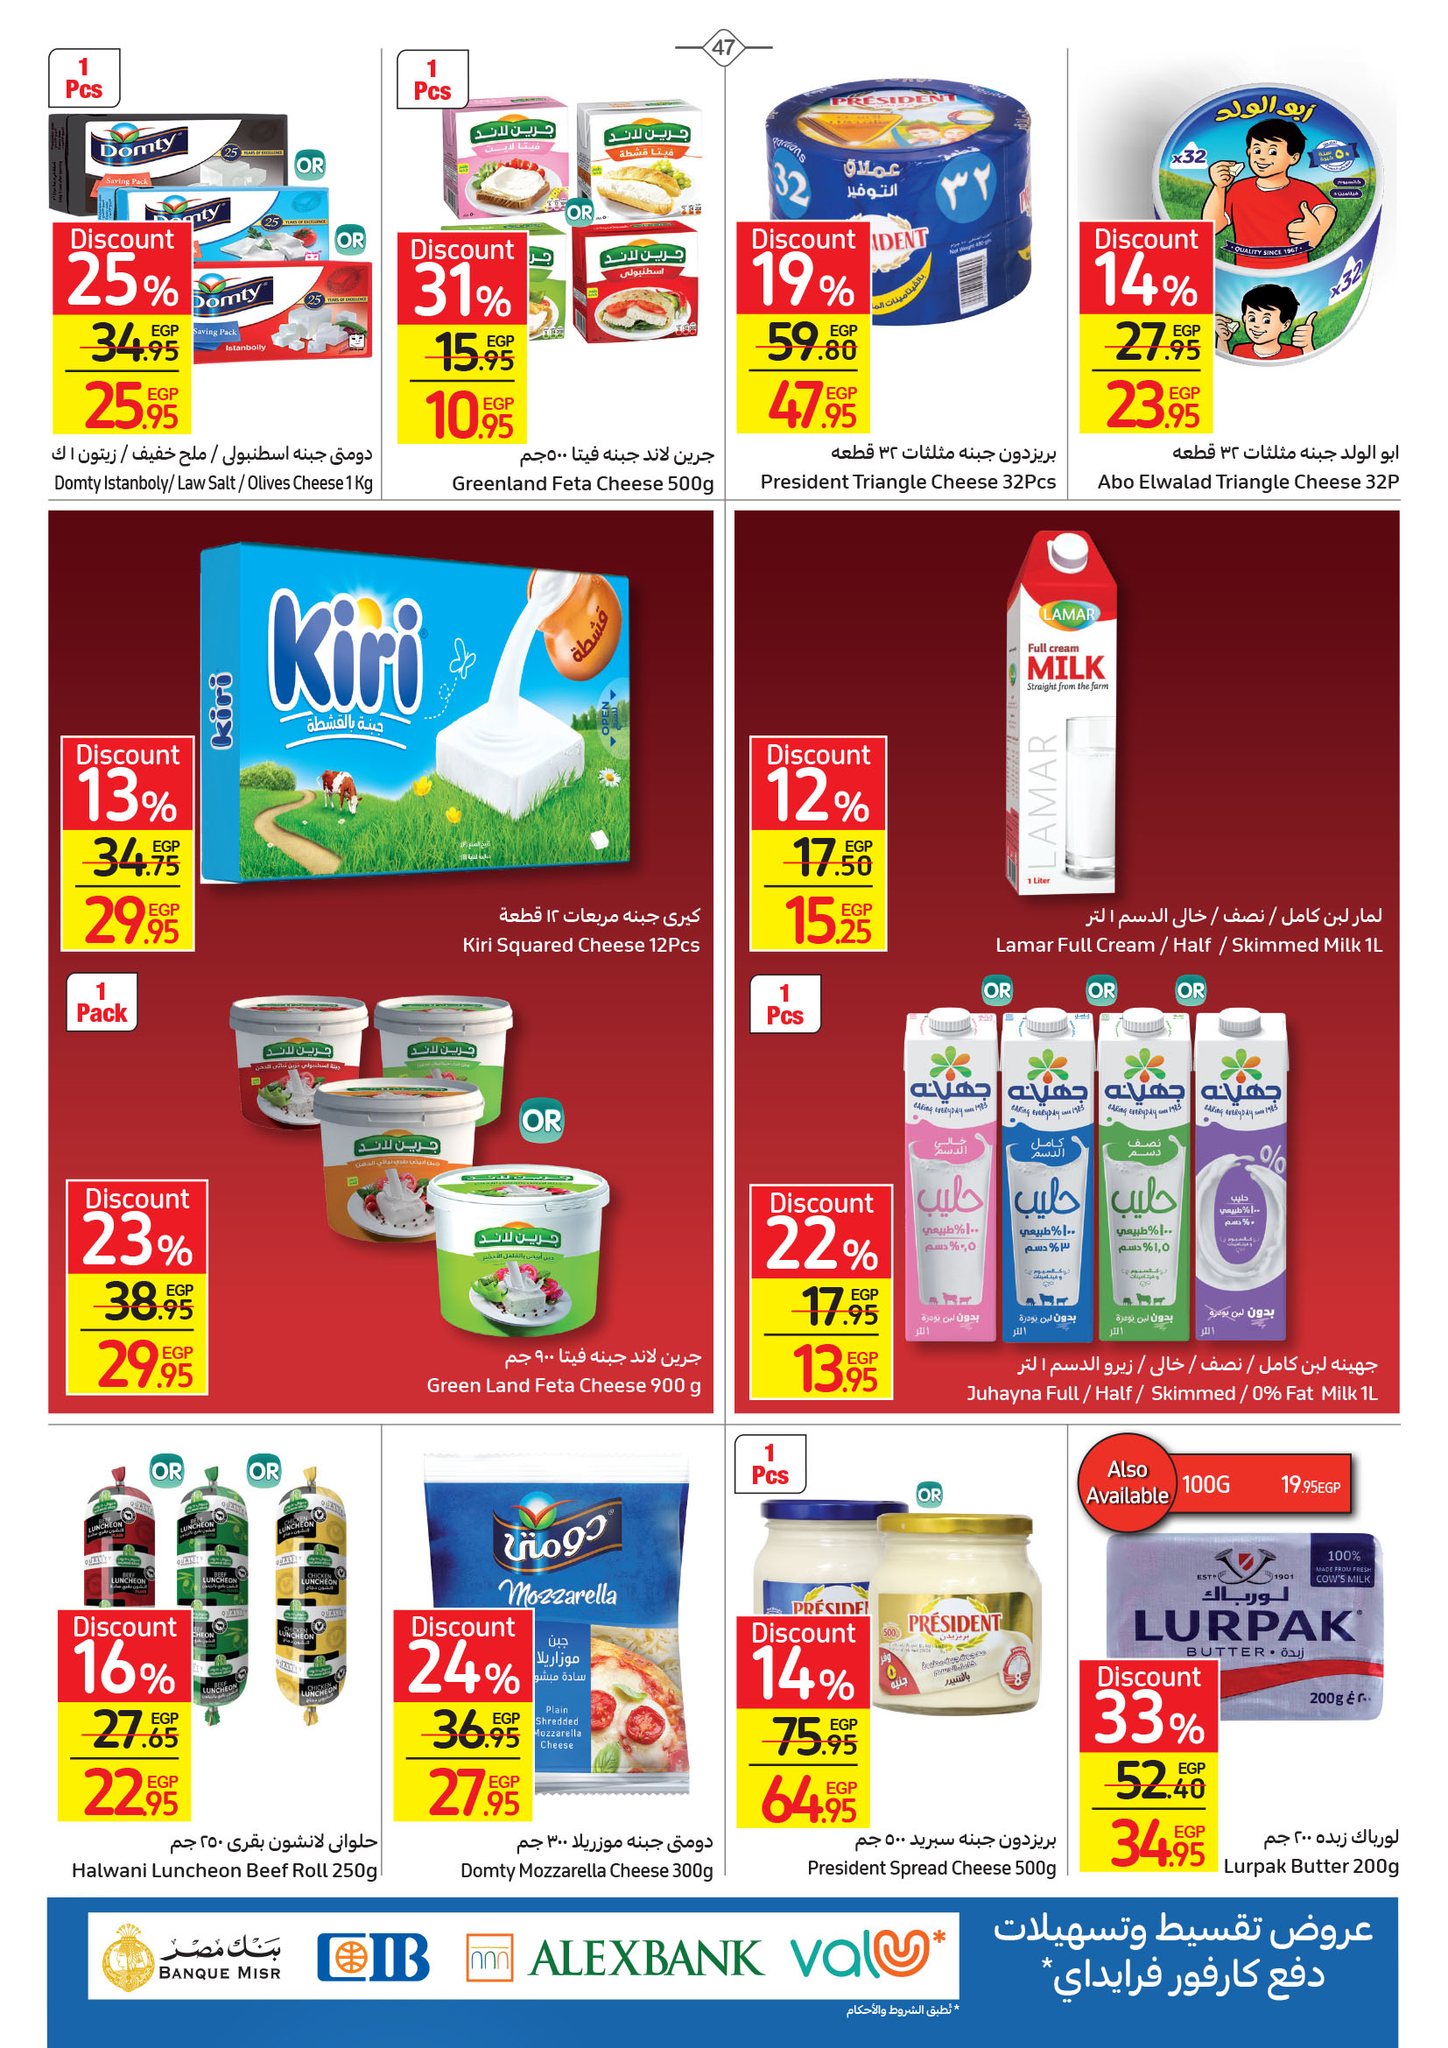 Watch the latest Carrefour half price offers "Last Chance Offer" until December 4 47